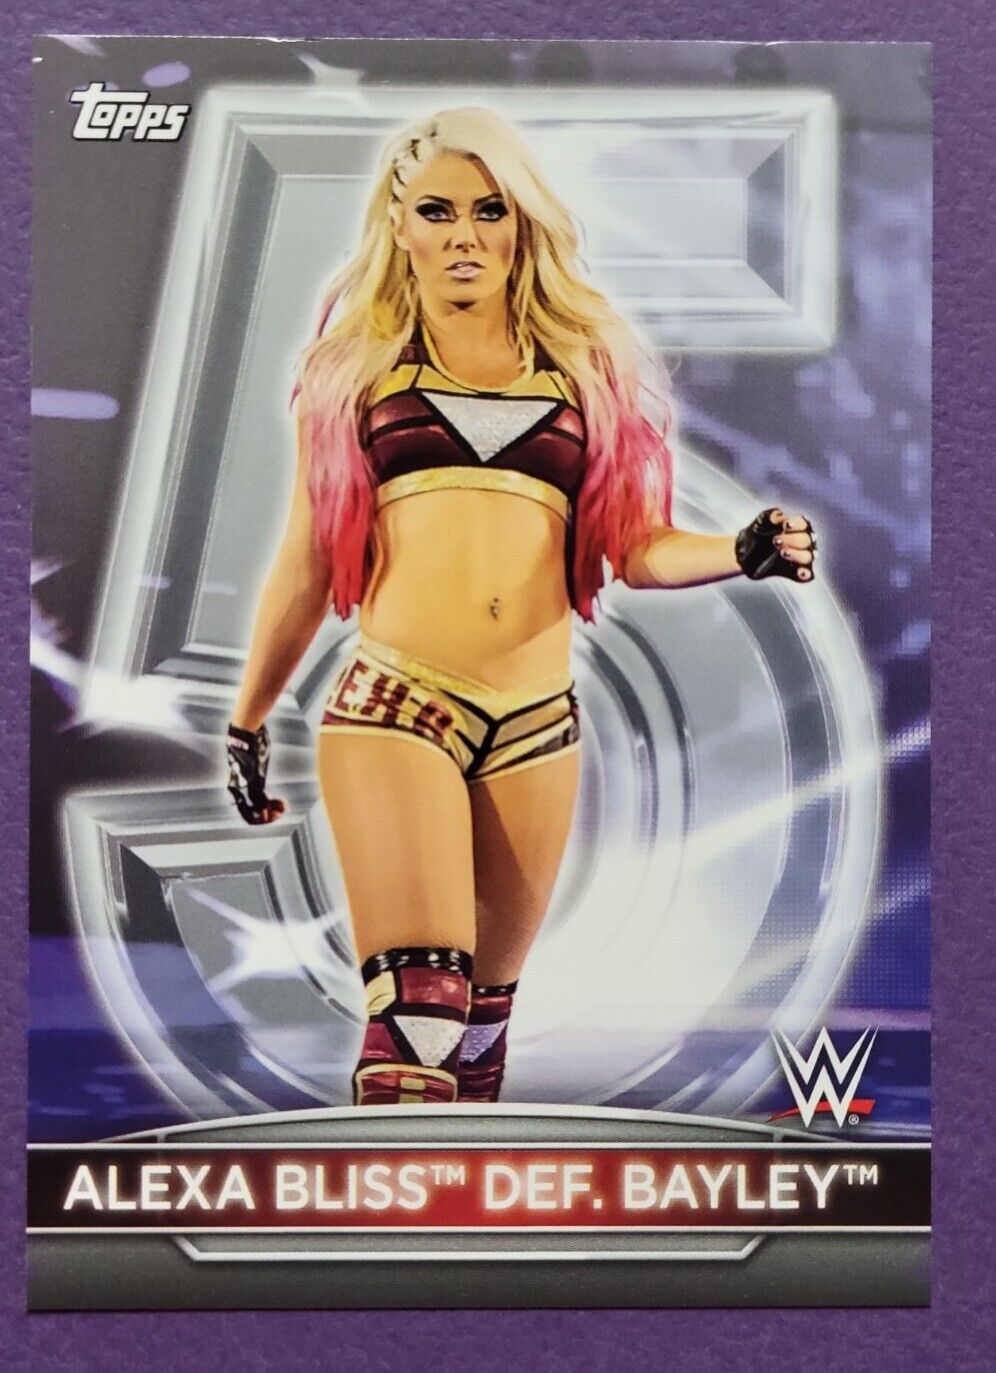 2021 TOPPS WWE WOMEN\'S DIVISION 5th ANNIV TRIBUTE CARD - ALEXA BLISS DEF. BAYLEY